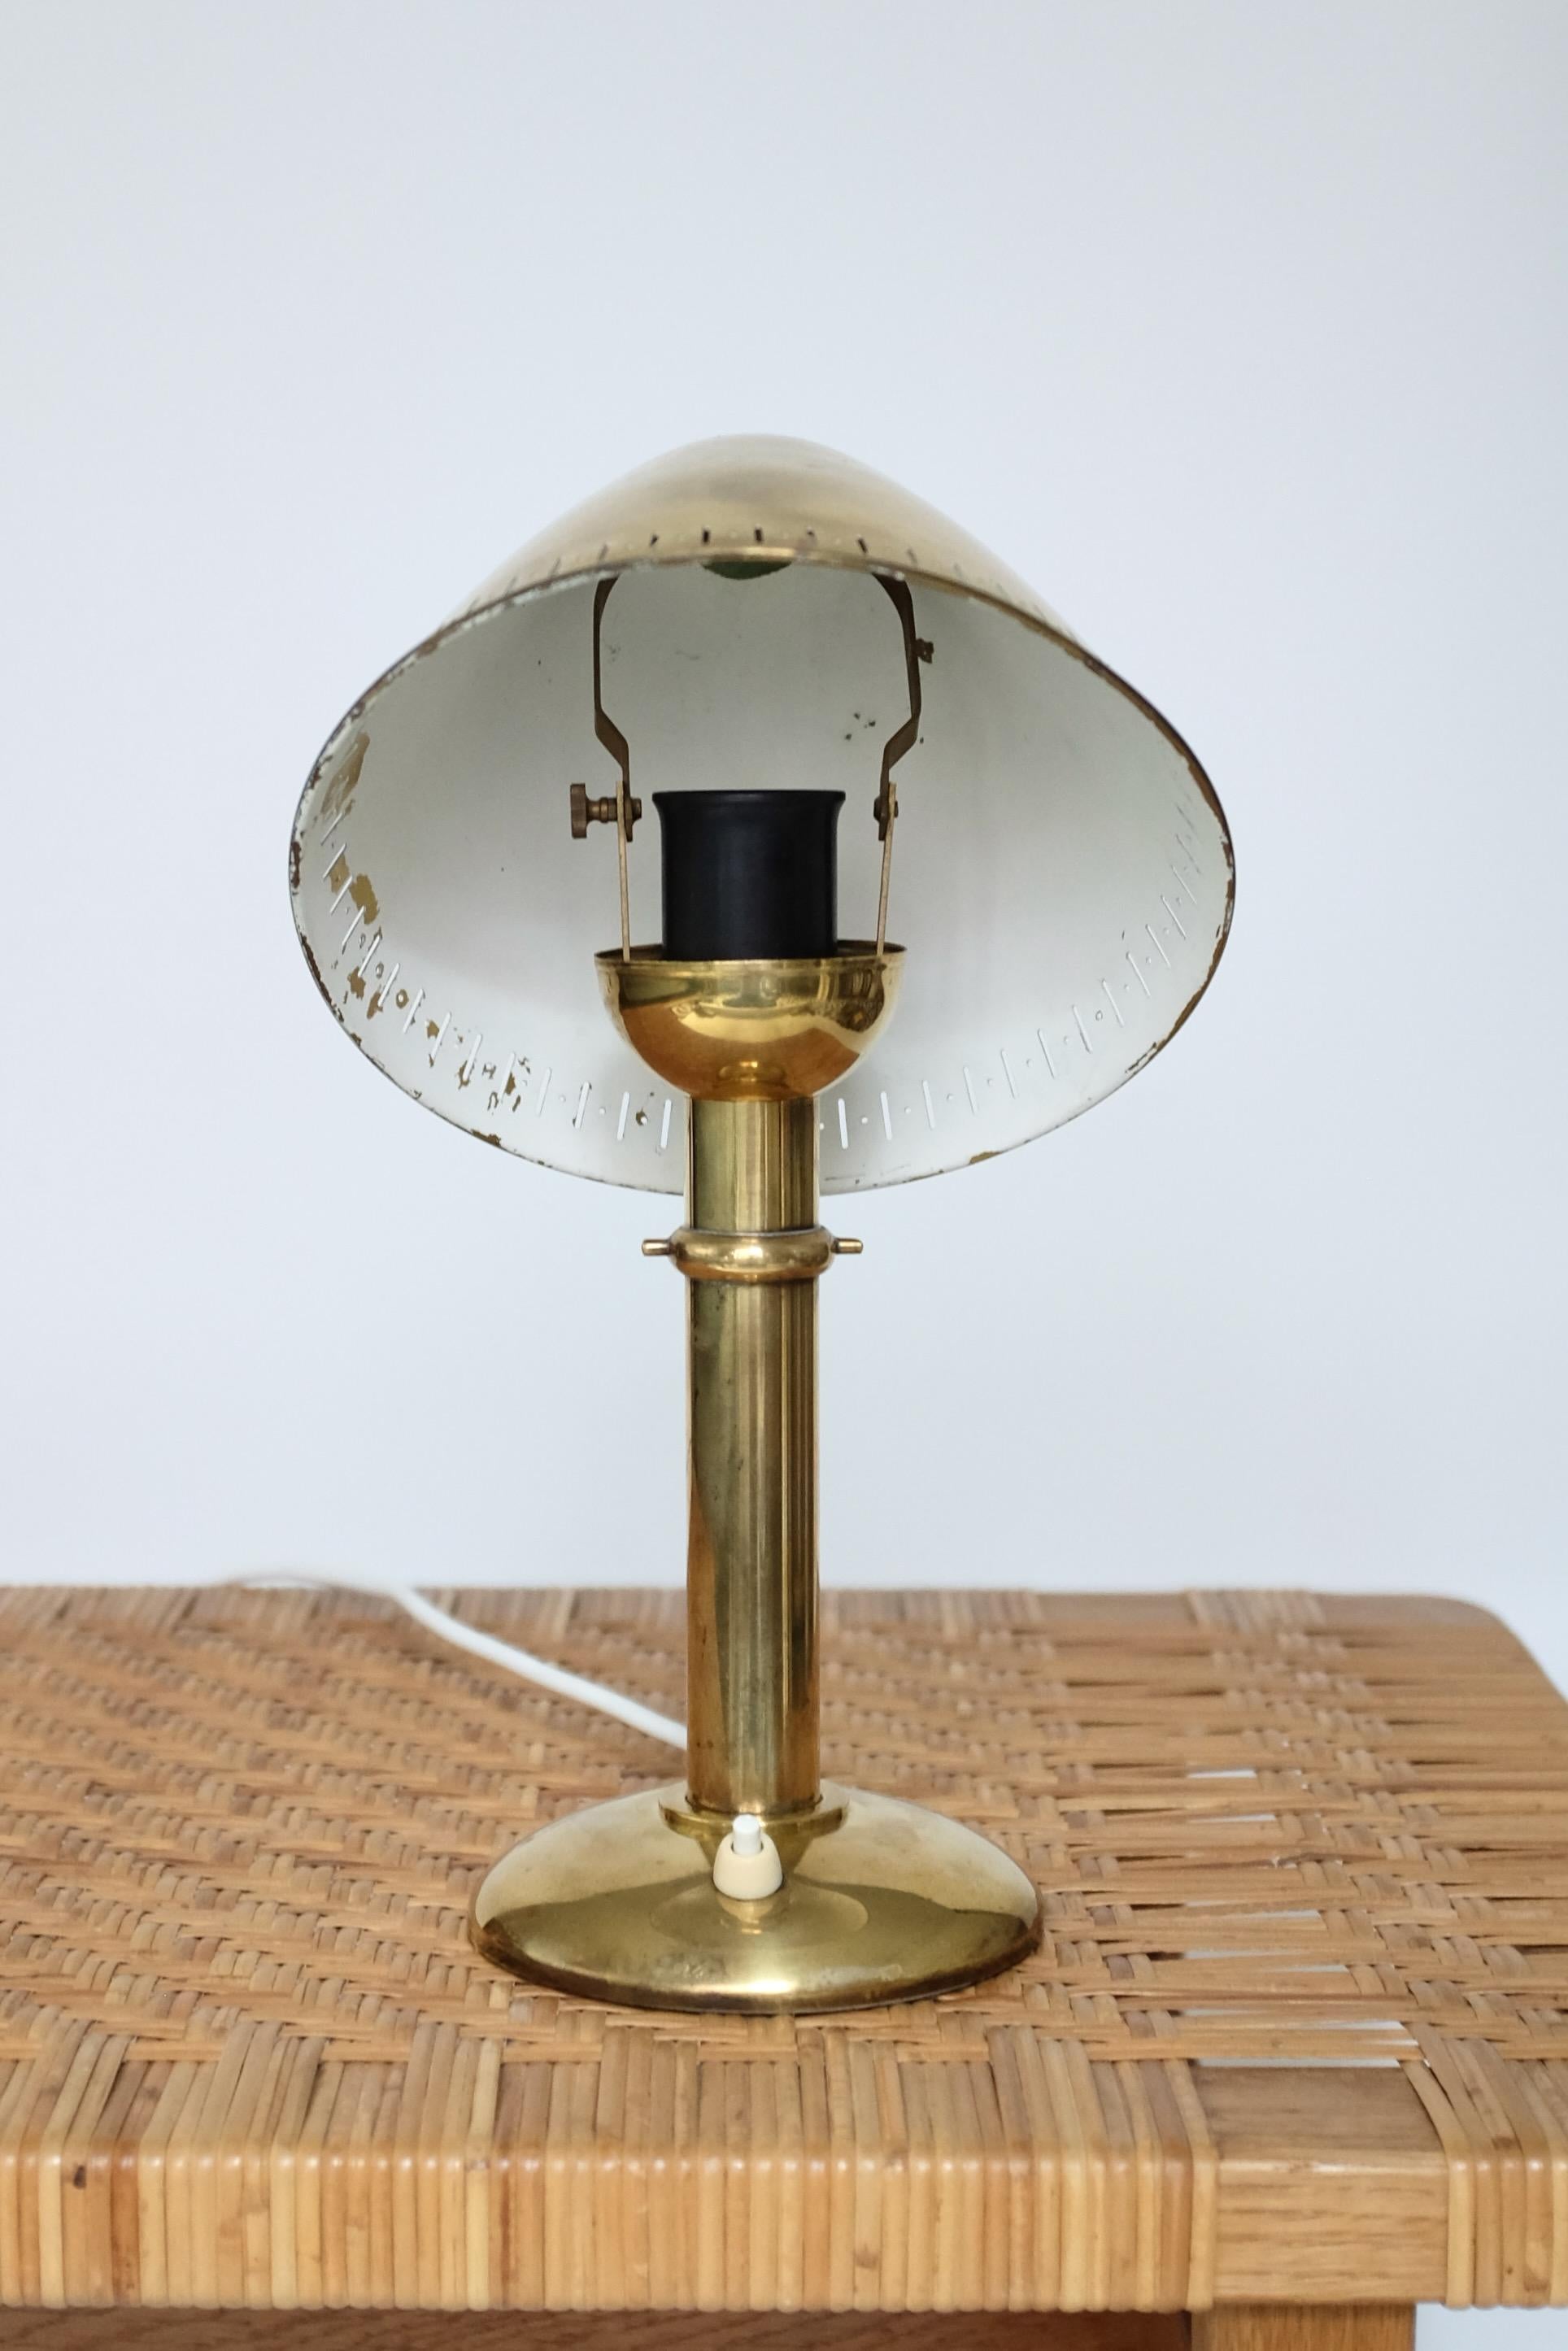 Rare Brass table lamp by Swedish light brand ASEA from the 1950's. Adjustable screen and in original condition. Age appropriate wear with small marks to the inner screen and brass. A beautiful piece perfect for desk or side table. 

Country: